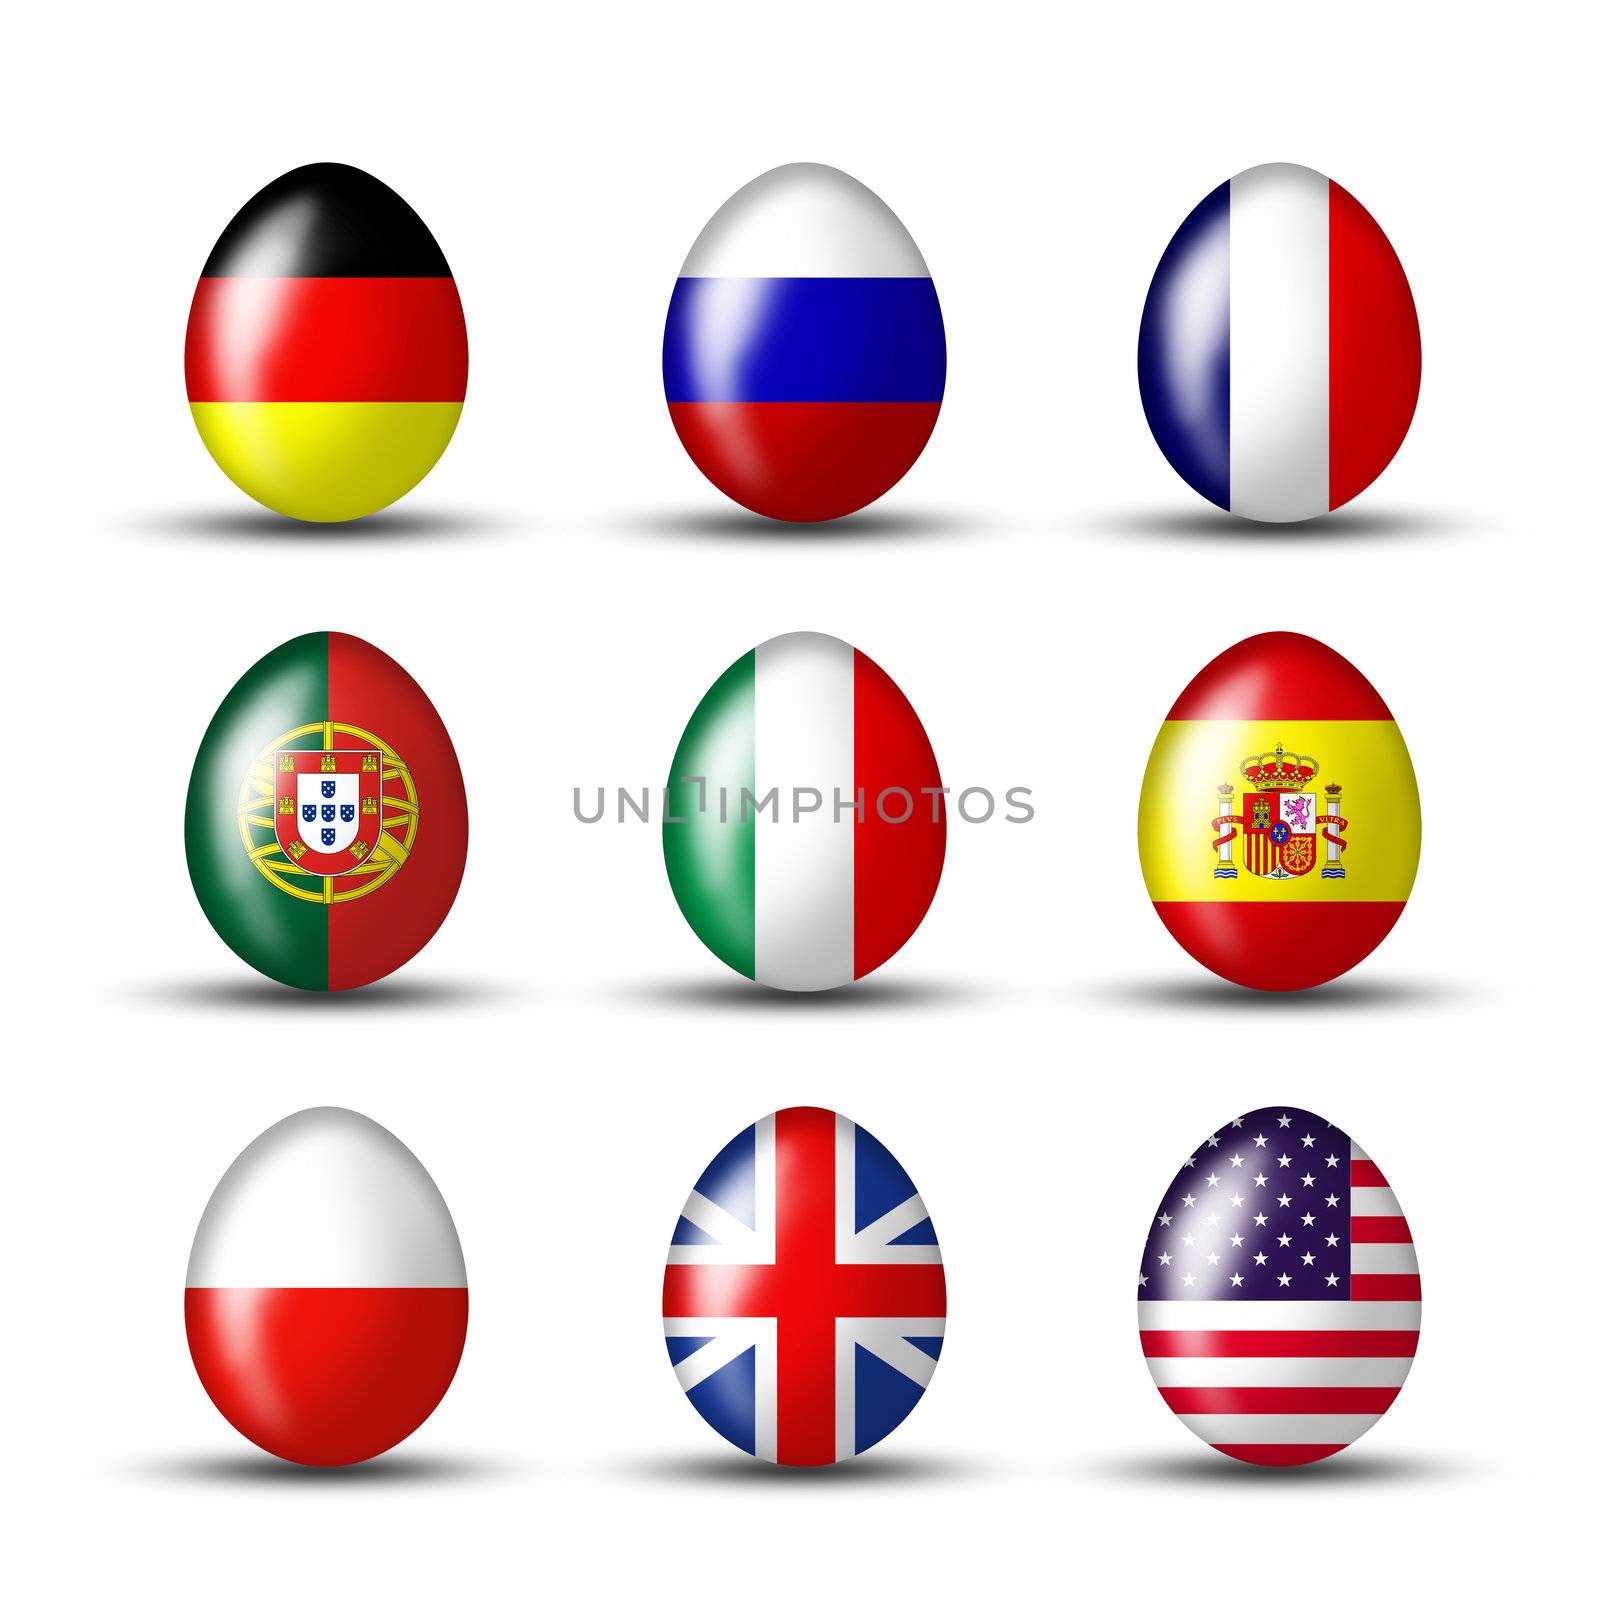 Egg collection from many countries by photochecker